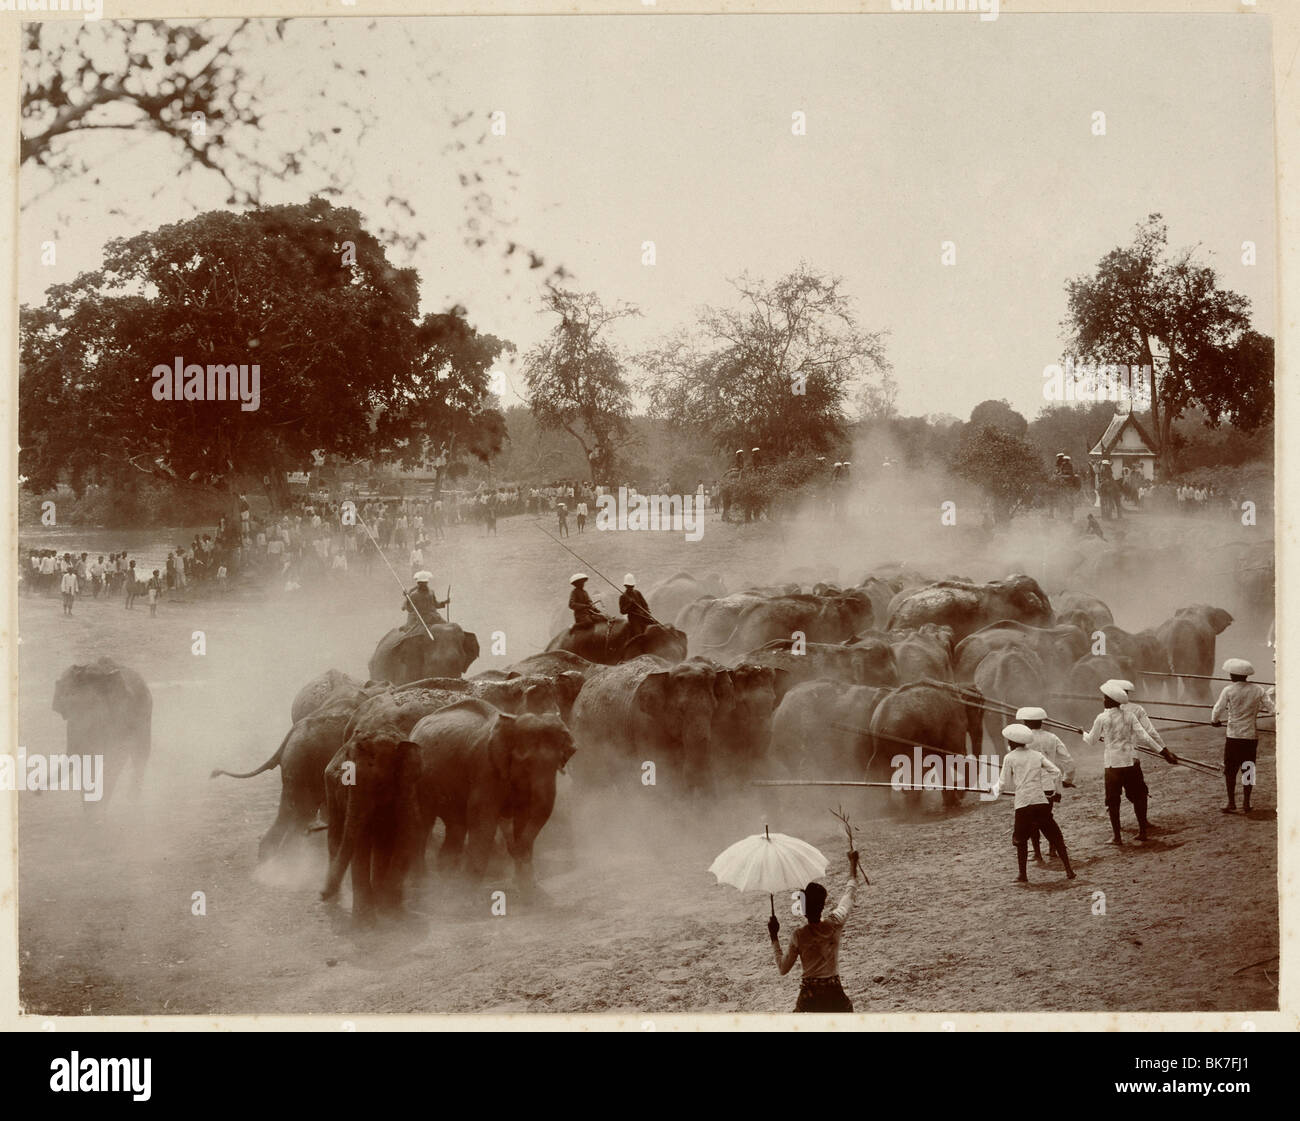 Phtoograph of Royal elephant hunt in Ayutthaya circa 1890, Thailand, Southeast Asia, Asia Stock Photo